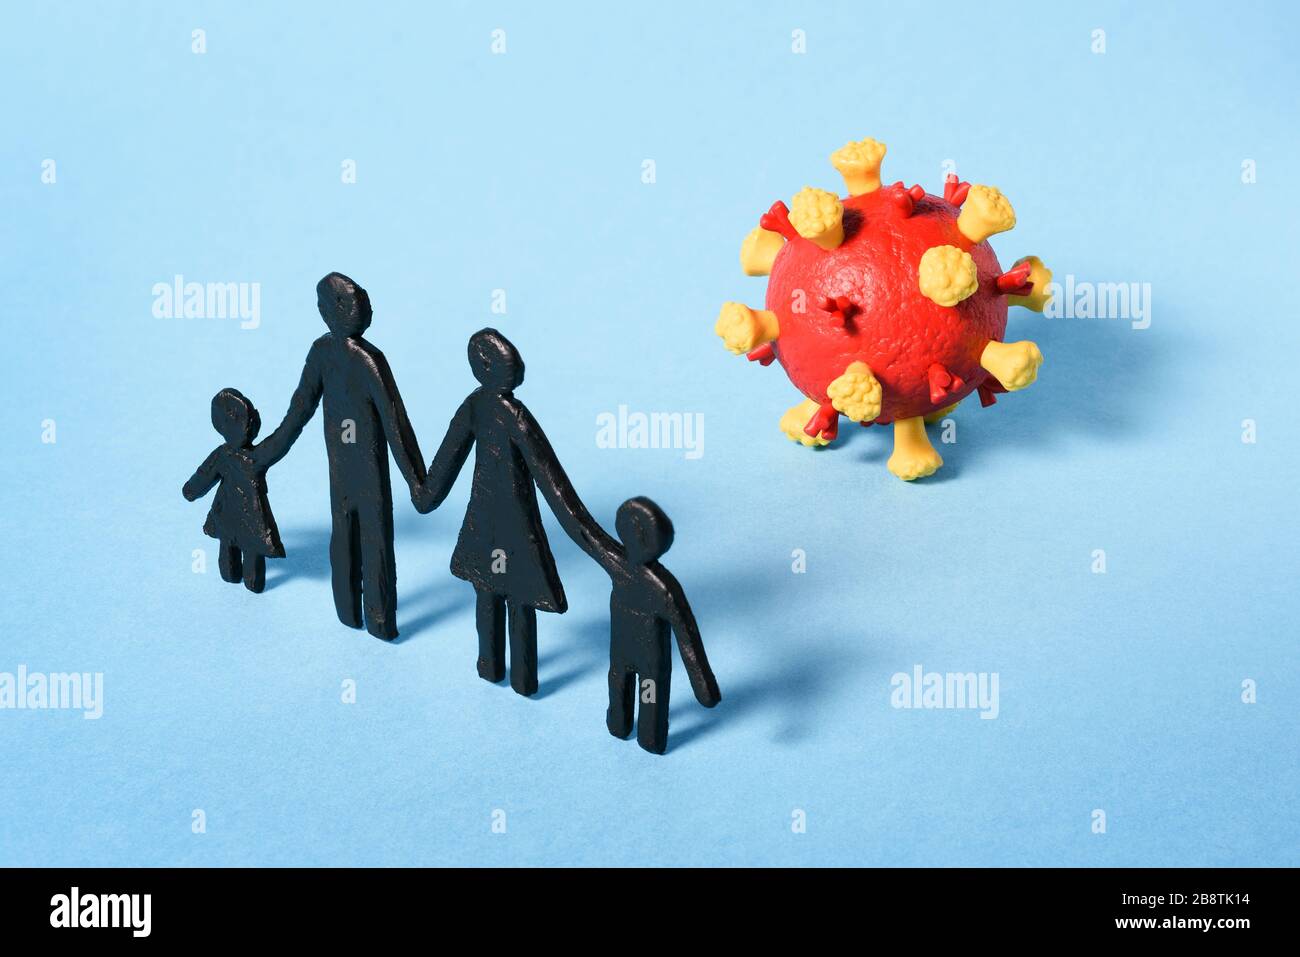 Family Coronavirus Threat. How to protect yourself and your children? Pandemic COVID-19 Stock Photo